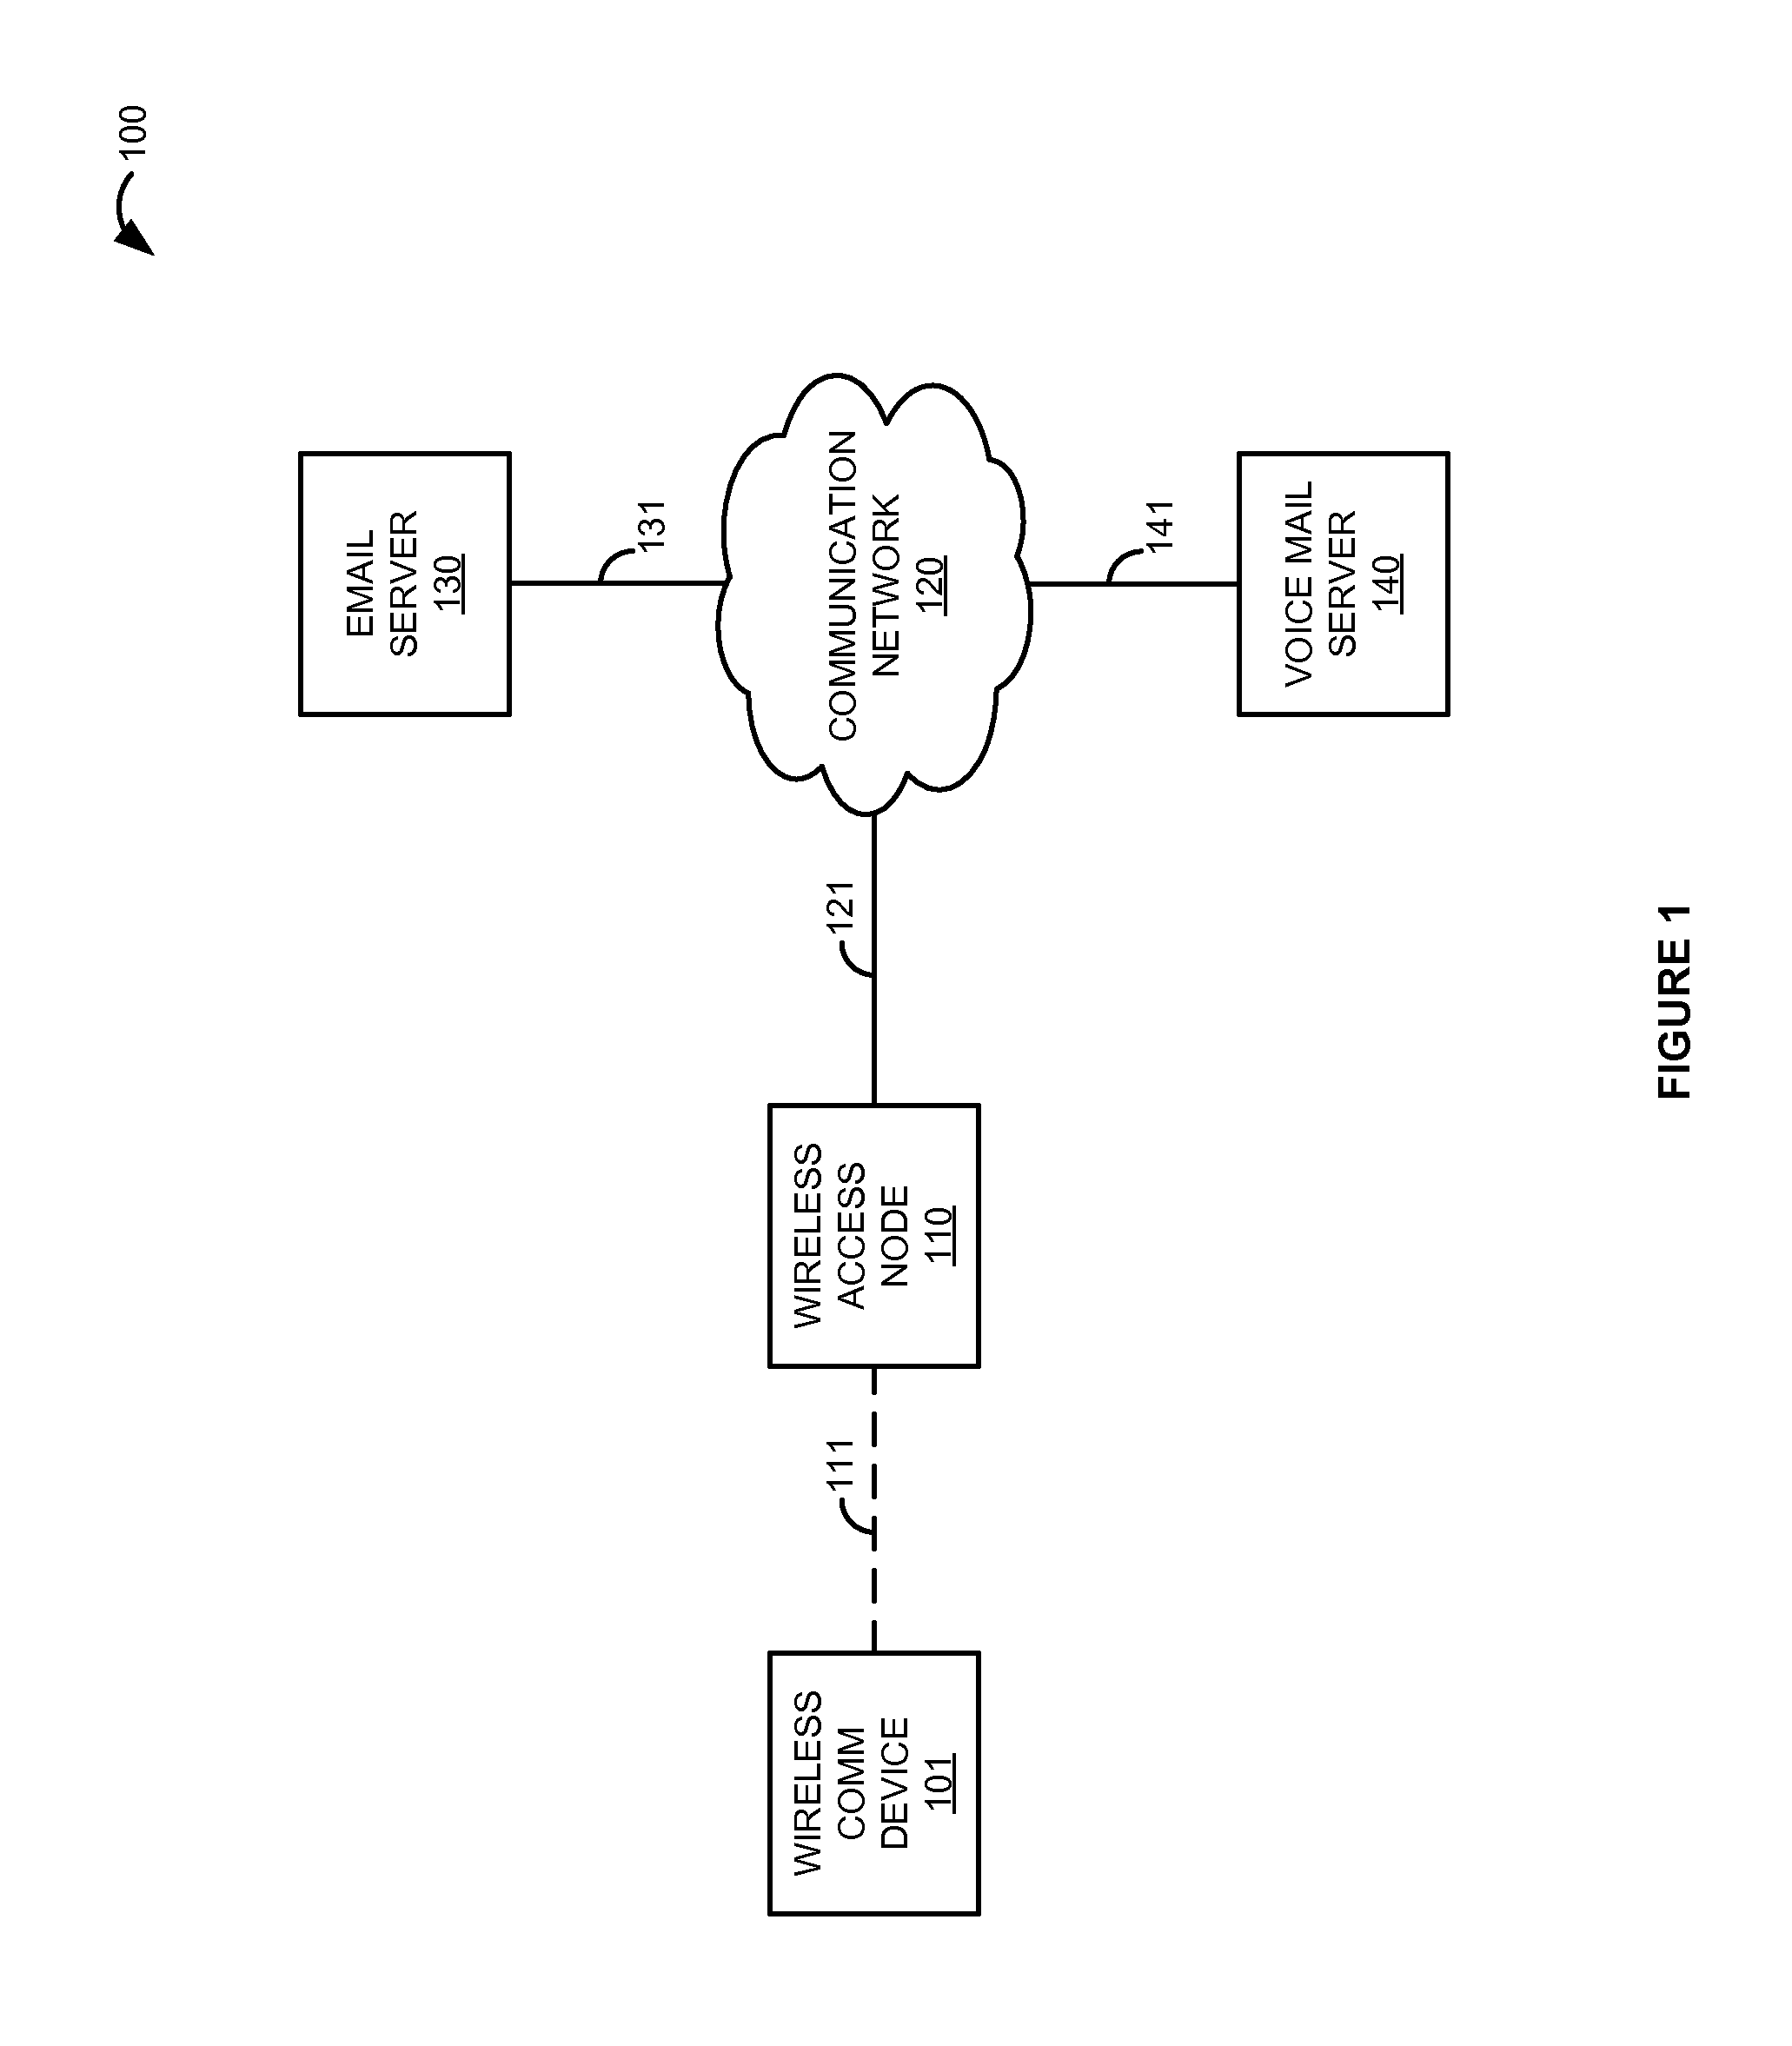 Synchronization of voice mail greeting and email auto-reply by a wireless communication device